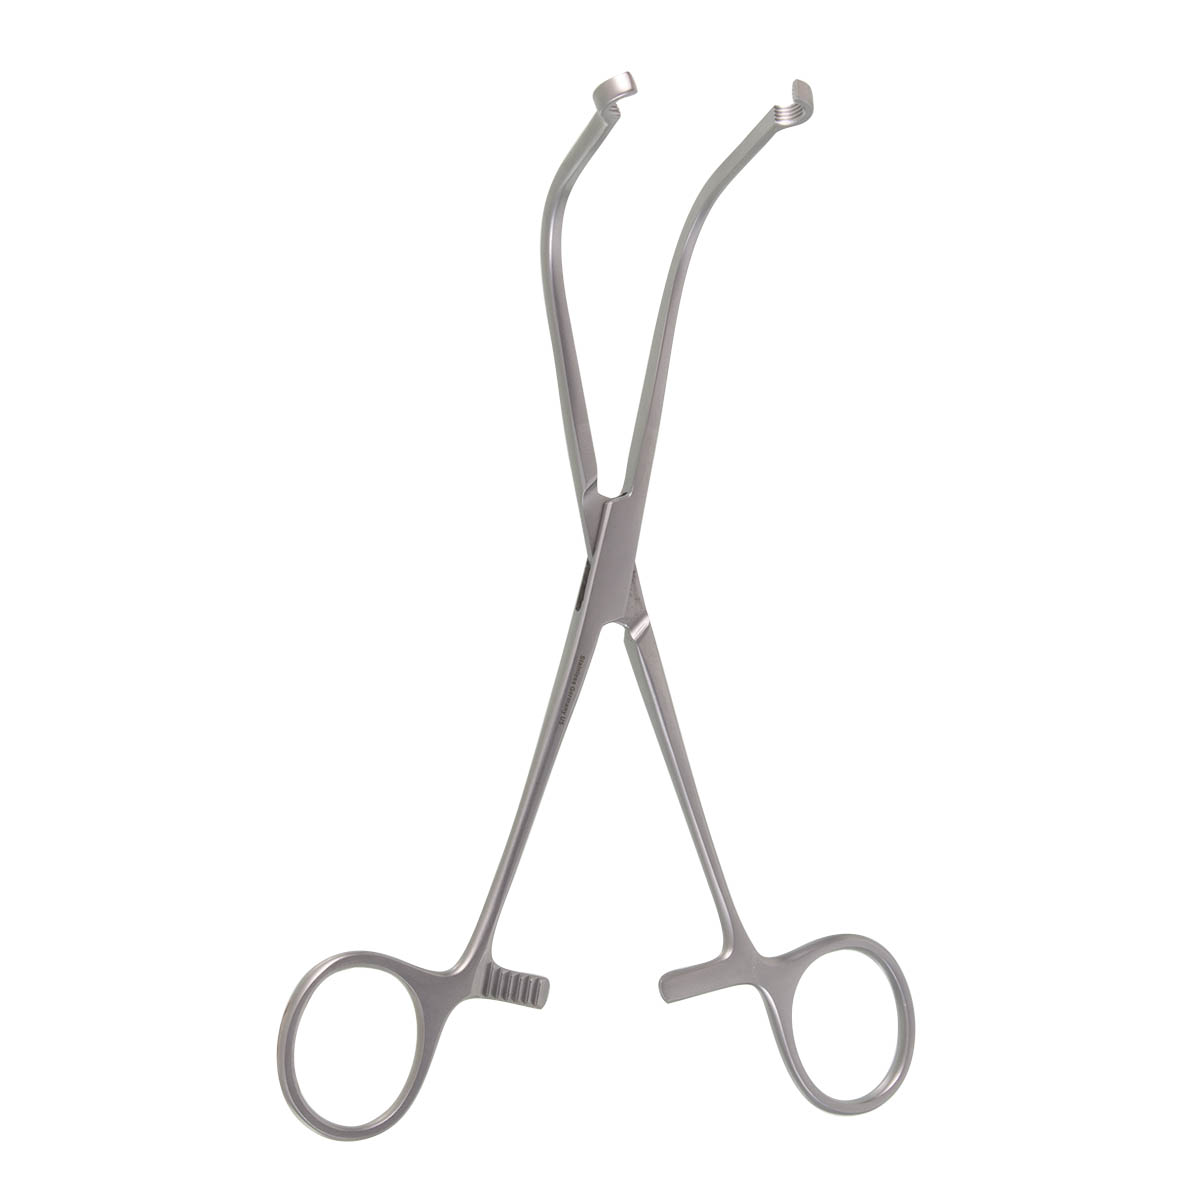 Large Single Artery Clamps, 120g